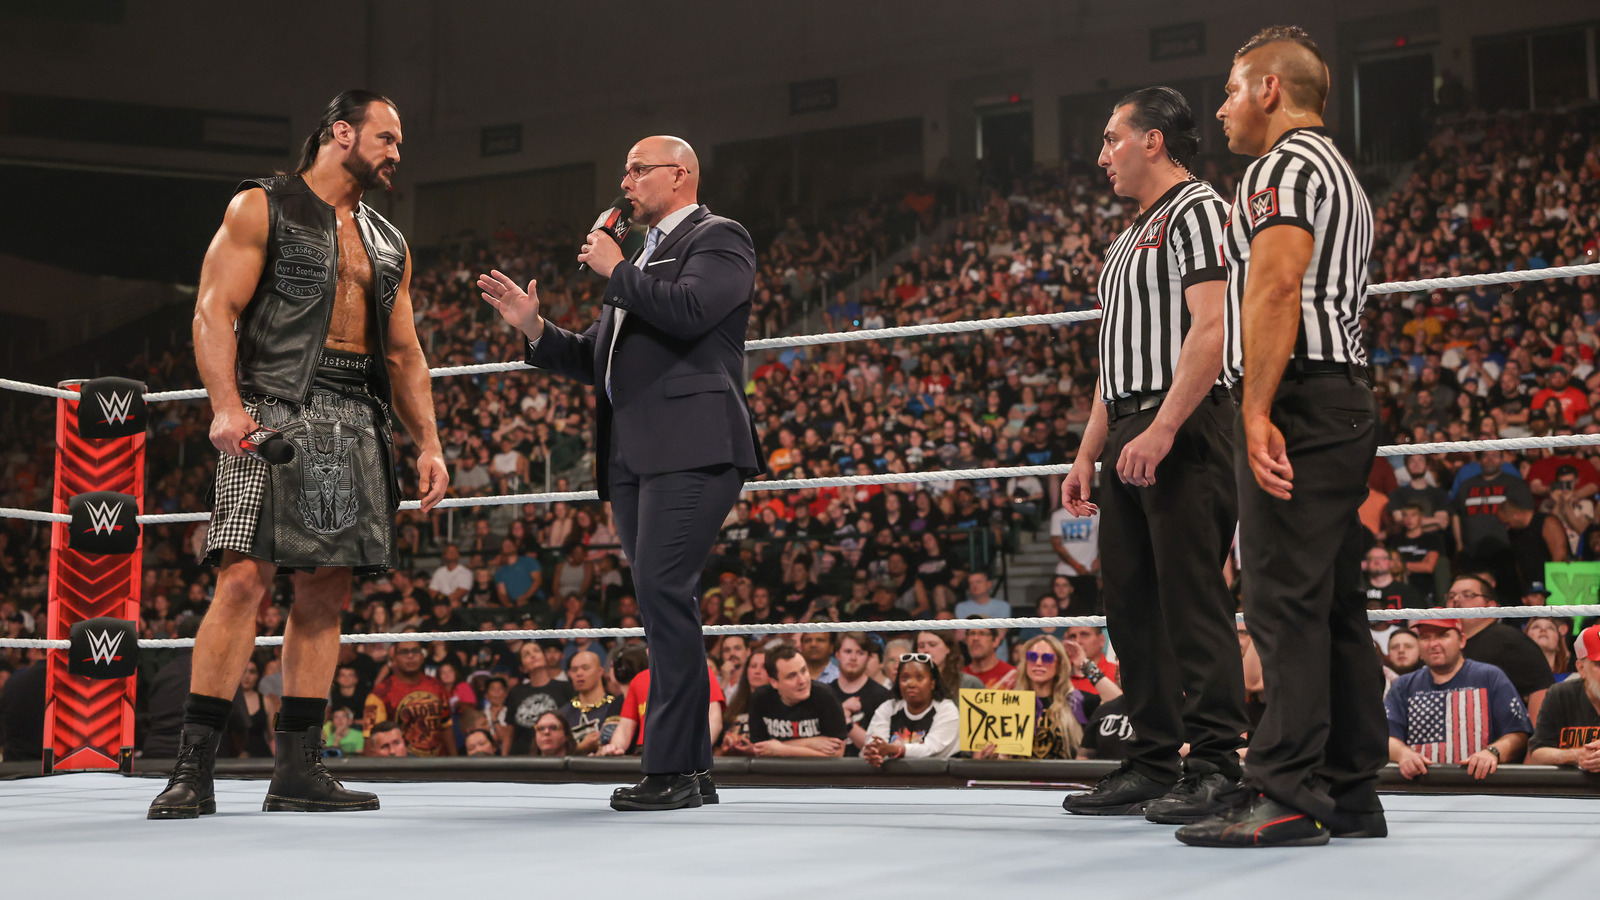 Seth Rollins Attacks Drew McIntyre After WWE Raw GM Adam Pearce Upholds His Suspension